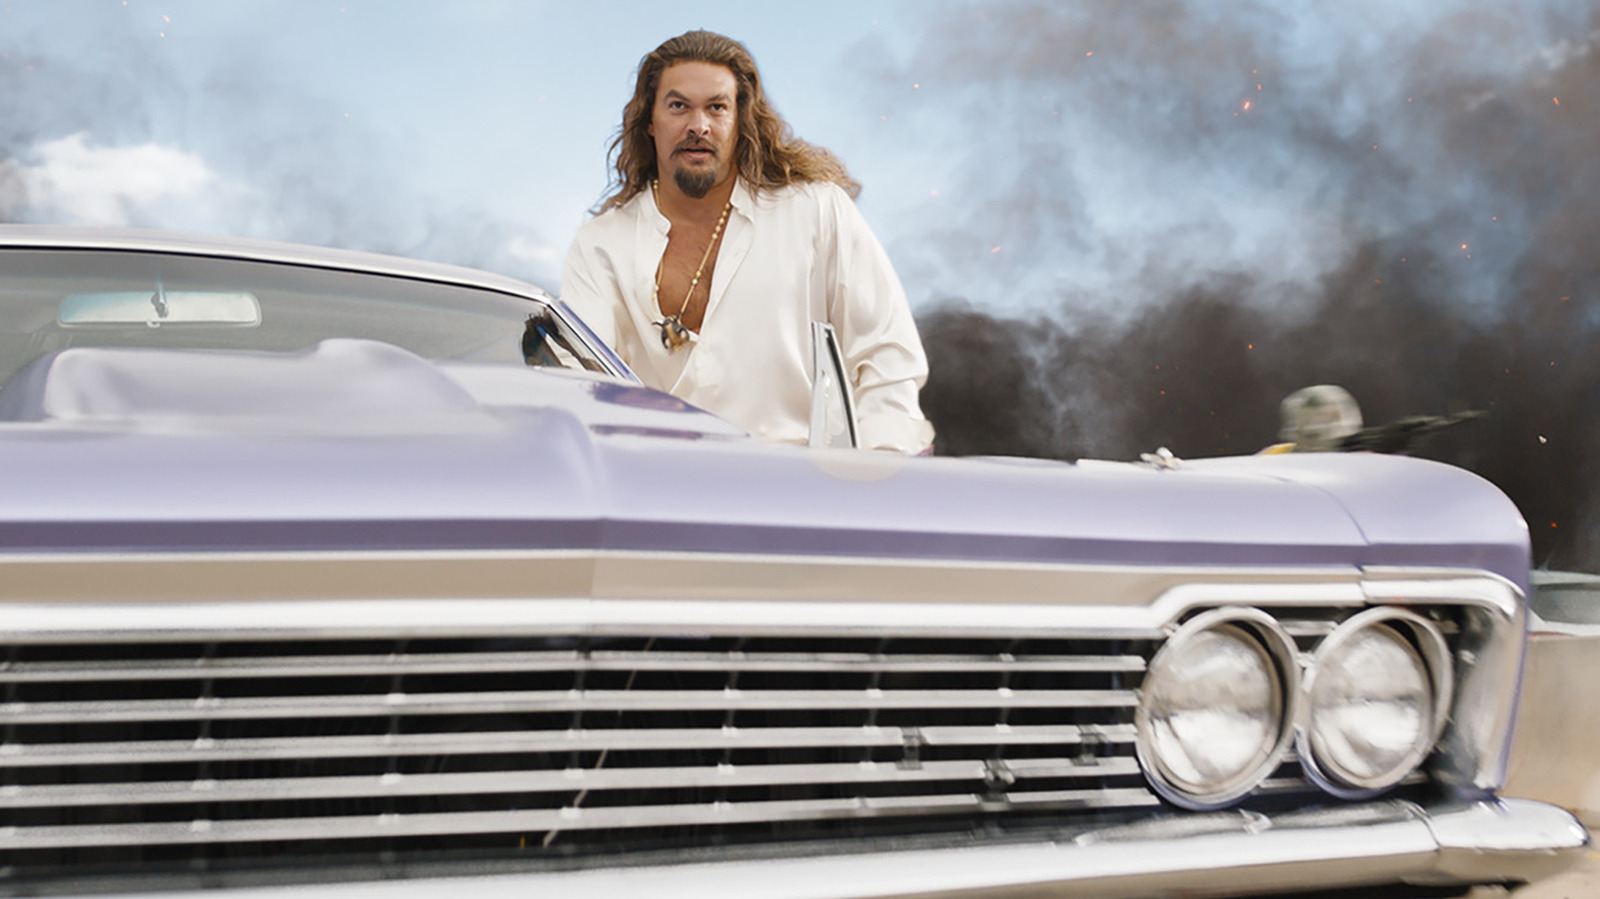 Fast X Review: Jason Momoa's Unhinged, Chaotic Villain Makes For Outrageous  Entertainment